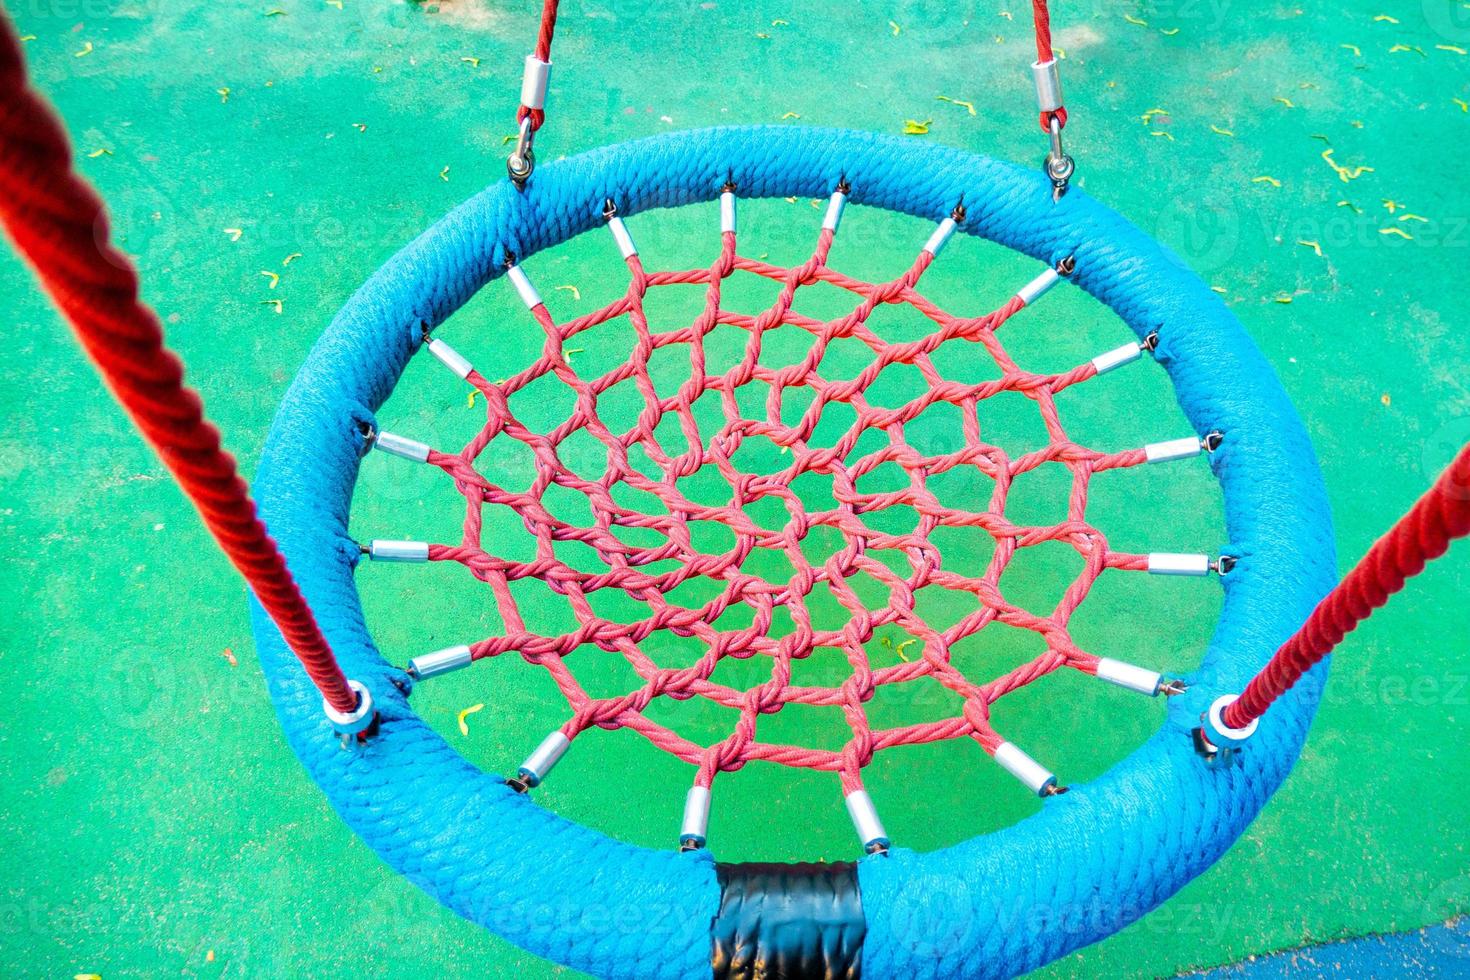 Round swing seat made of mesh in playground. Empty blue rope web nest for swinging closeup. photo